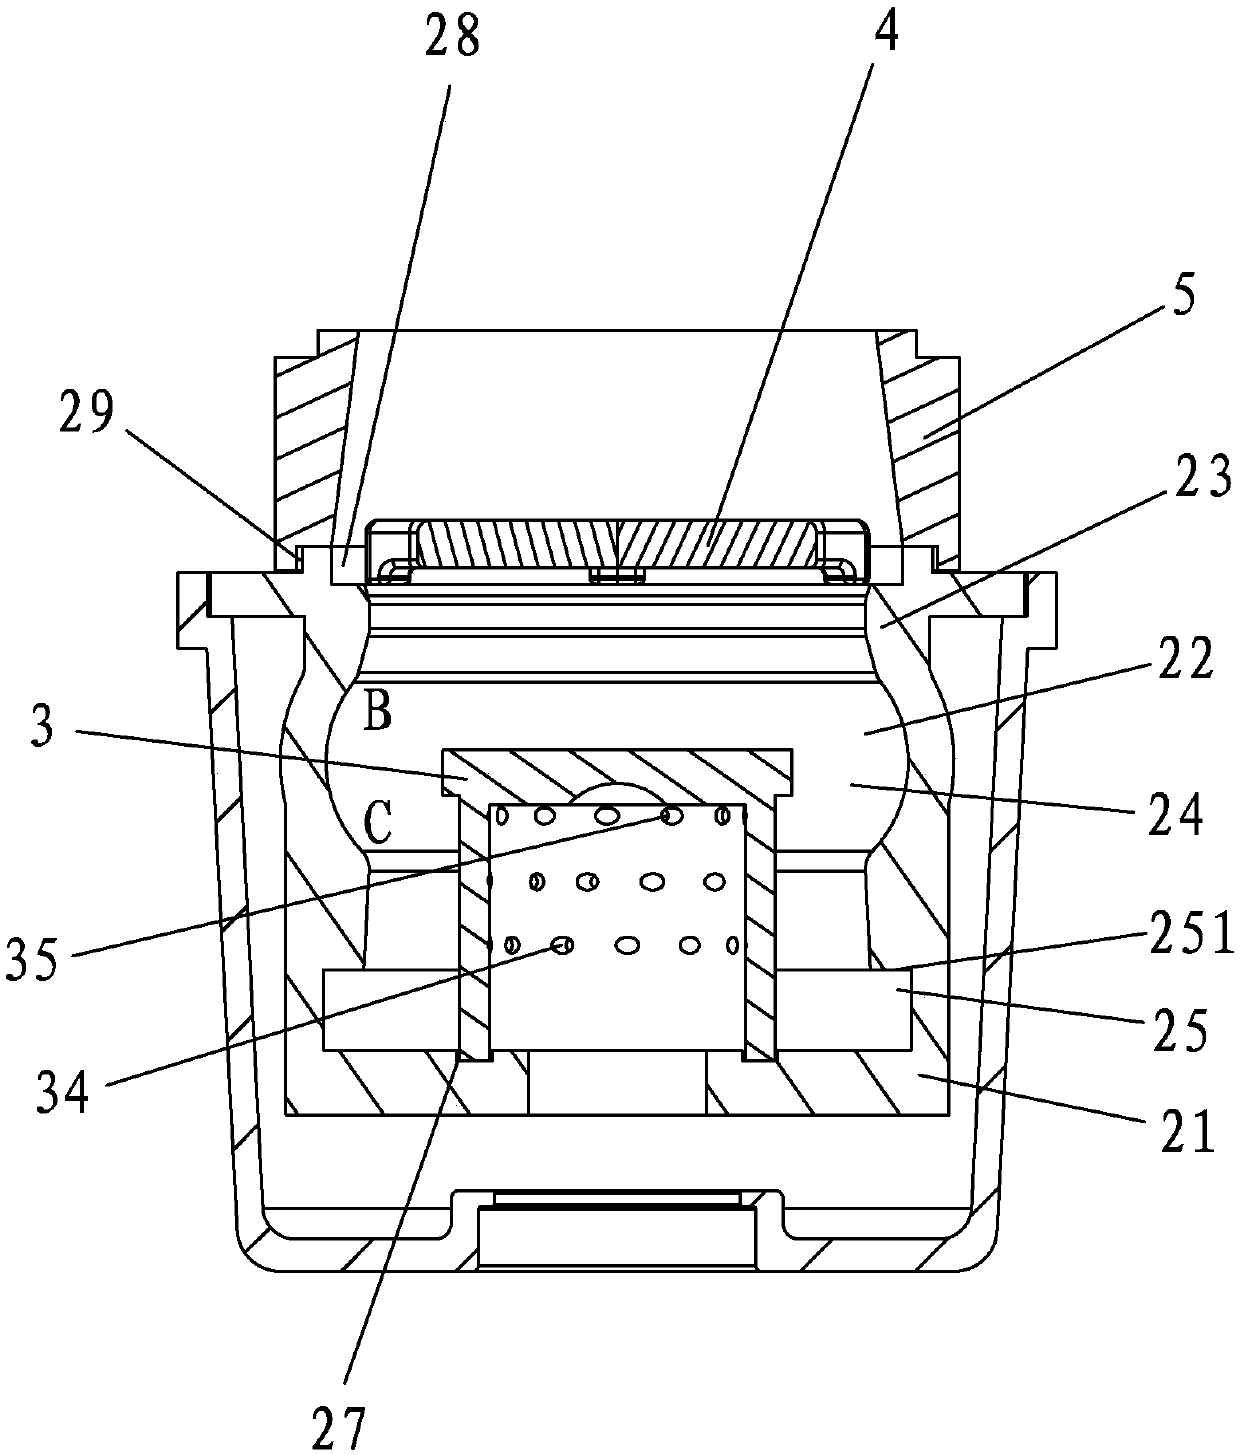 Improved Furnace Core for Compression Combustion Furnace